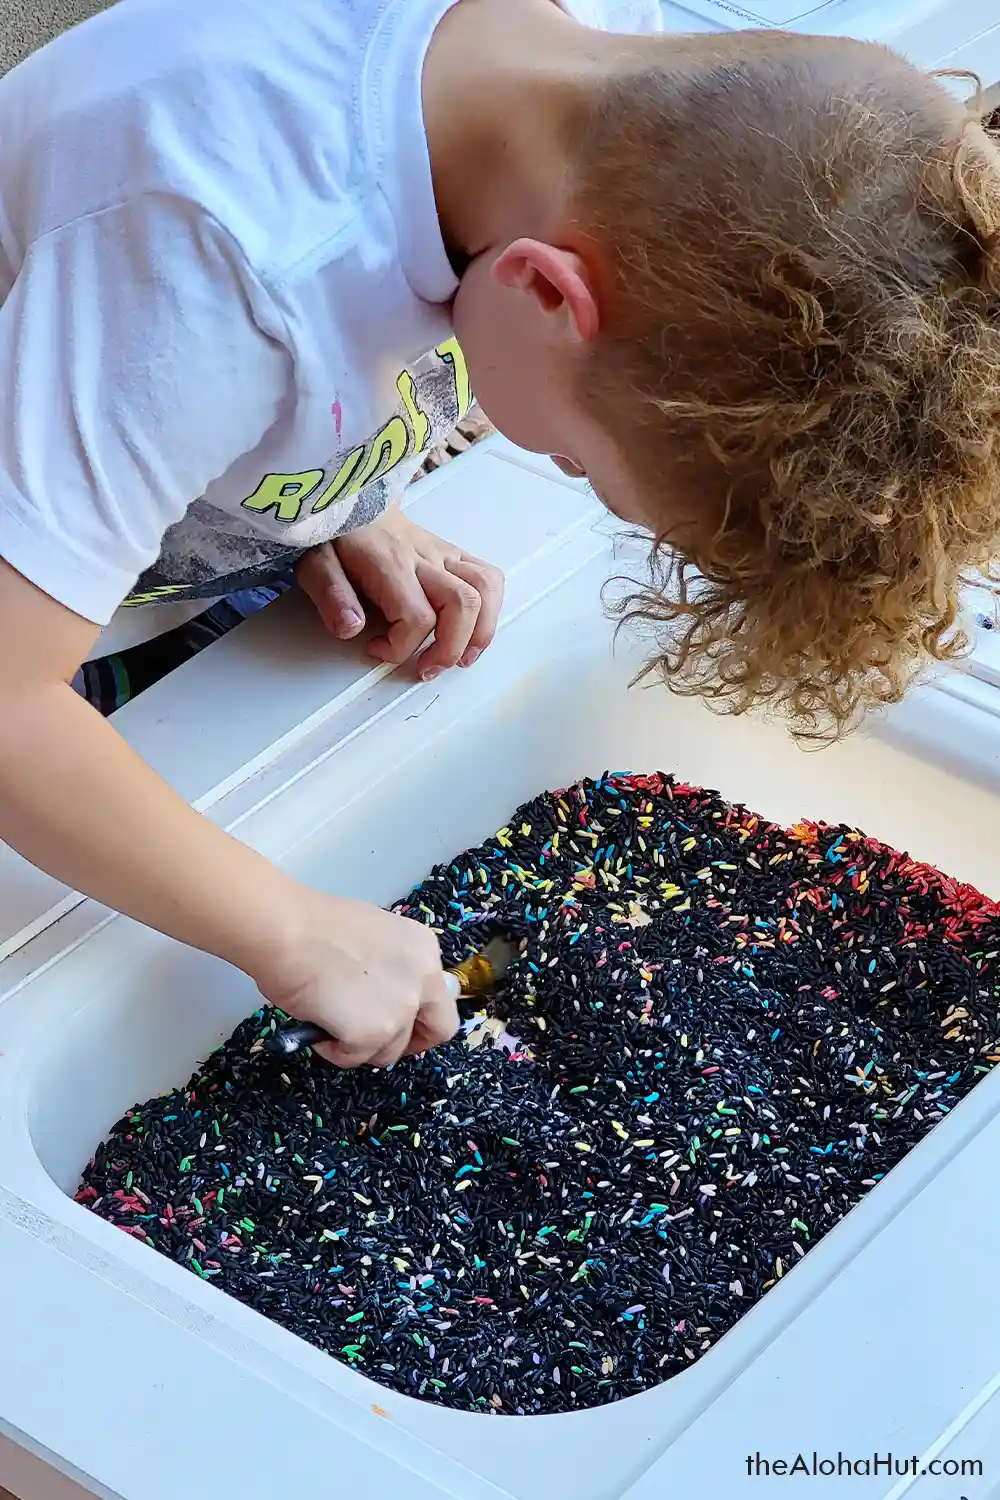 Among Us sensory table activity idea for kids, toddlers, and preschoolers. Download the printable I Spy Among Us game and instructions for an easy and fun kids sensory activity!